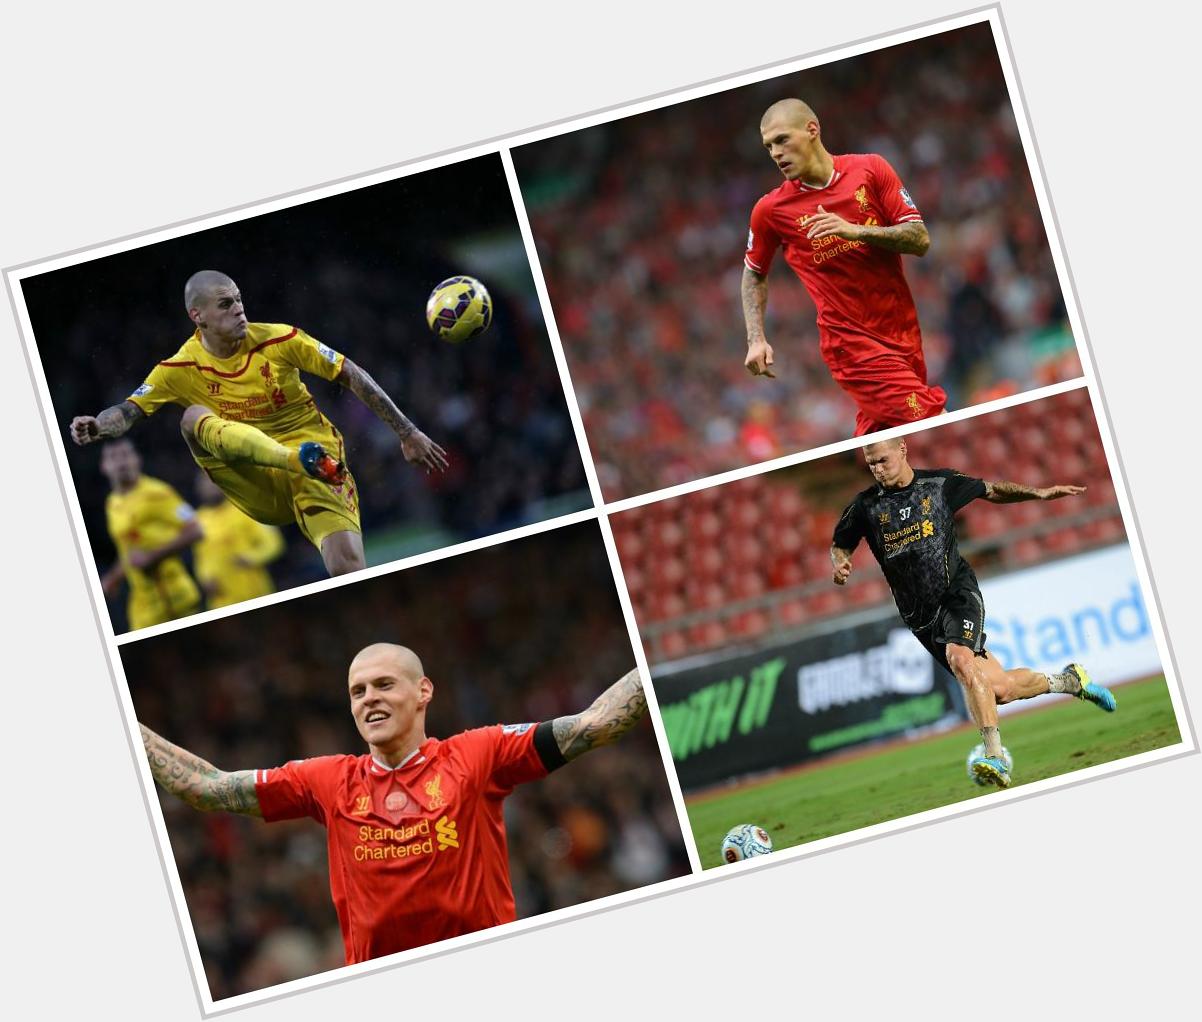 HAPPY 30TH BIRTHDAY to Martin Skrtel, centre back for Liverpool and captain of the Slovakian team. 